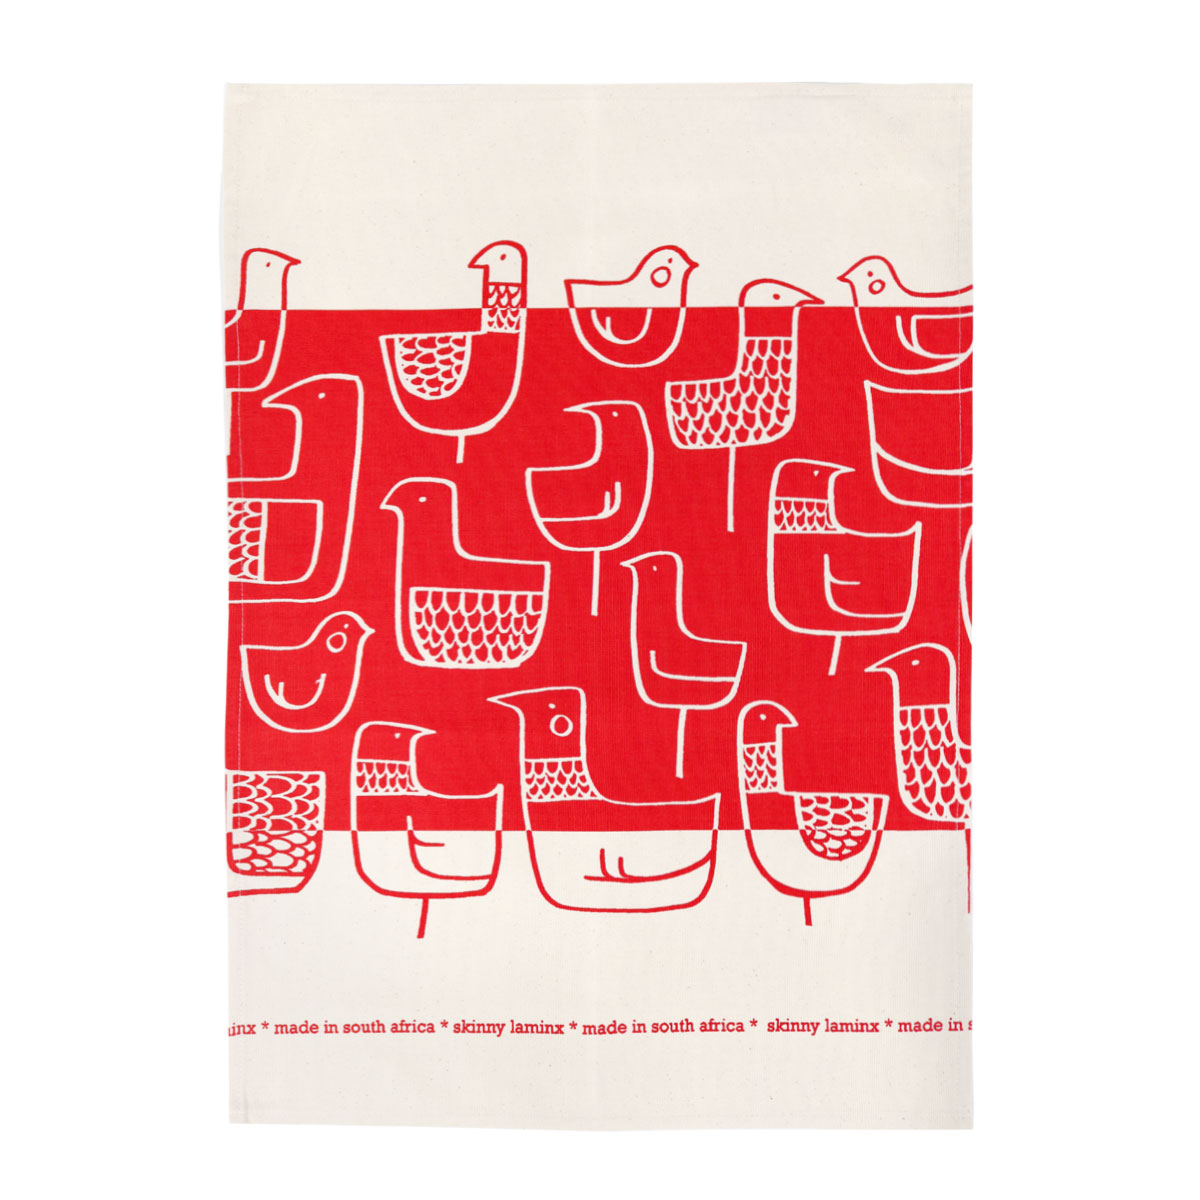 Red linen tea towel with bird designs. Text reads "made in south africa" and "skinny laminx."